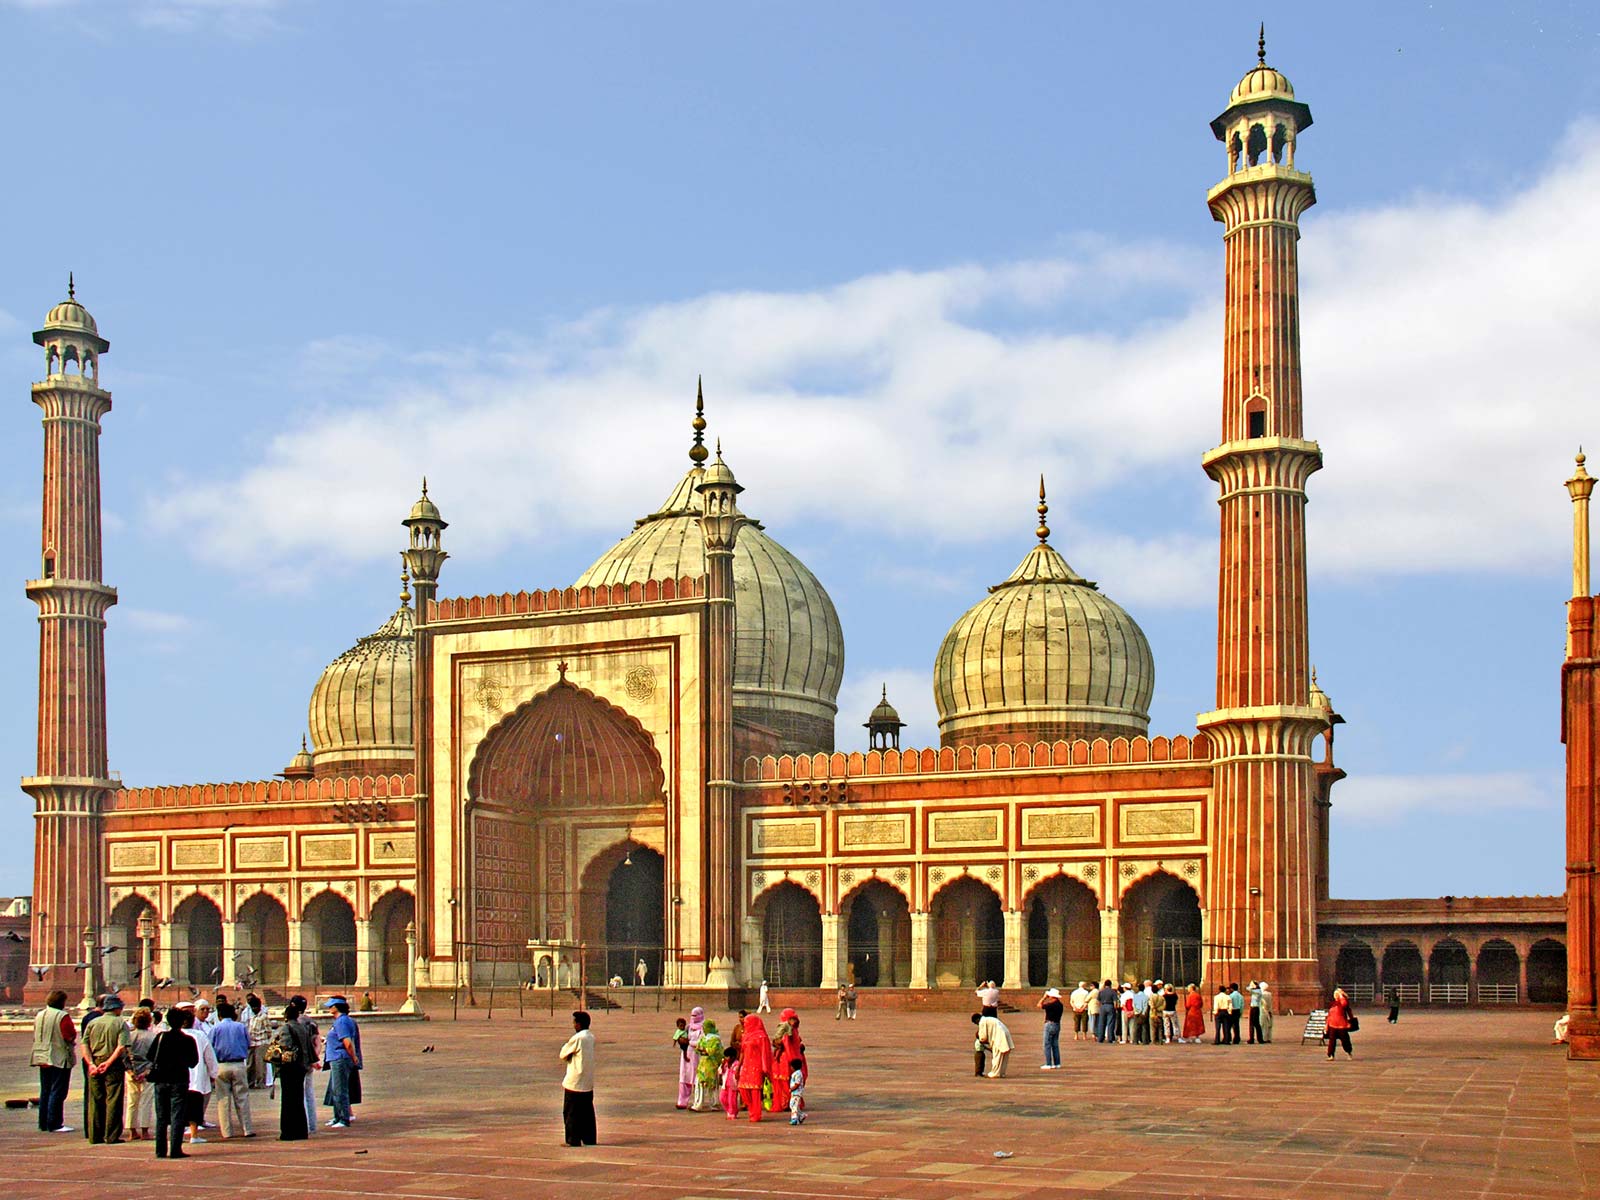 Letter from the Royal Imams to the Prime Minister for the repair of the Jama Masjid